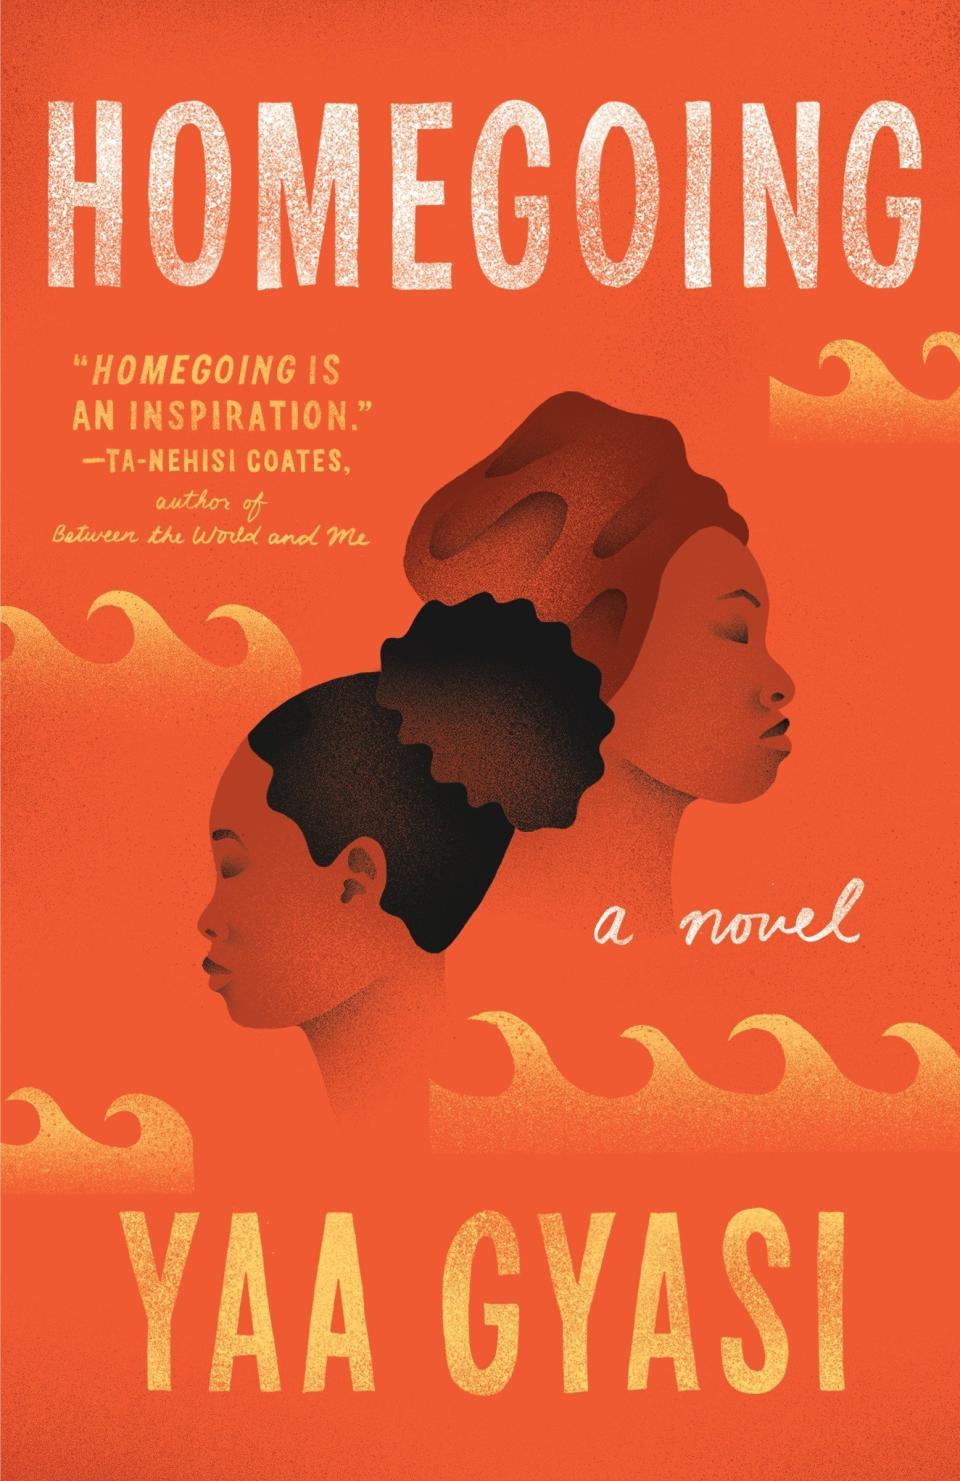 "Homegoing" was on Glen's list of recommendations and is popular right now among <a href="https://www.goodreads.com/book/show/27071490-homegoing" target="_blank" rel="noopener noreferrer">Goodreads members</a>. The novel follows two sisters &mdash; one who is sold into slavery, and another who marries an Englishman &mdash; and the generations that come after them. <a href="https://fave.co/3fdp2GN" target="_blank" rel="noopener noreferrer"><br /><br />Find it on Amazon﻿</a>.